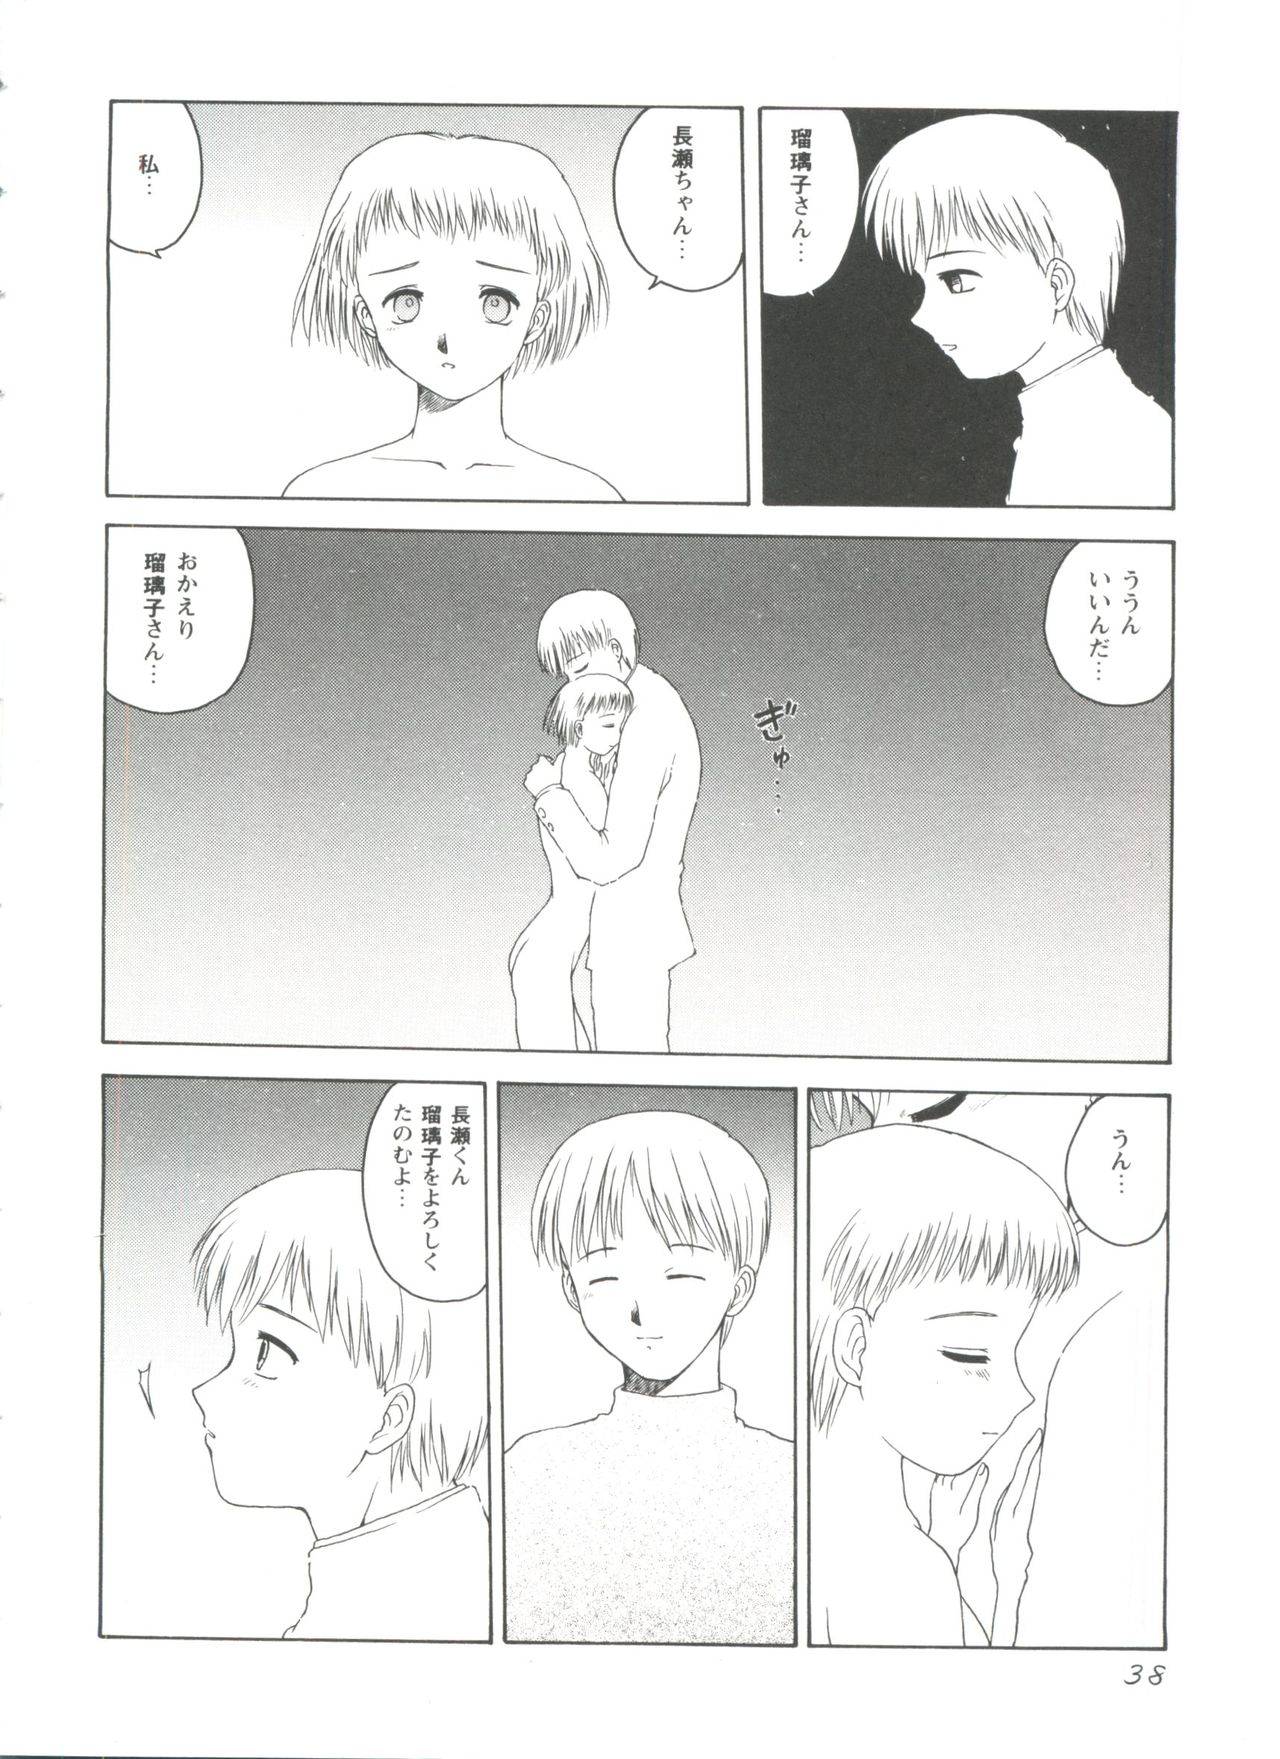 [Anthology] Love Heart 4 (To Heart, White Album) page 38 full